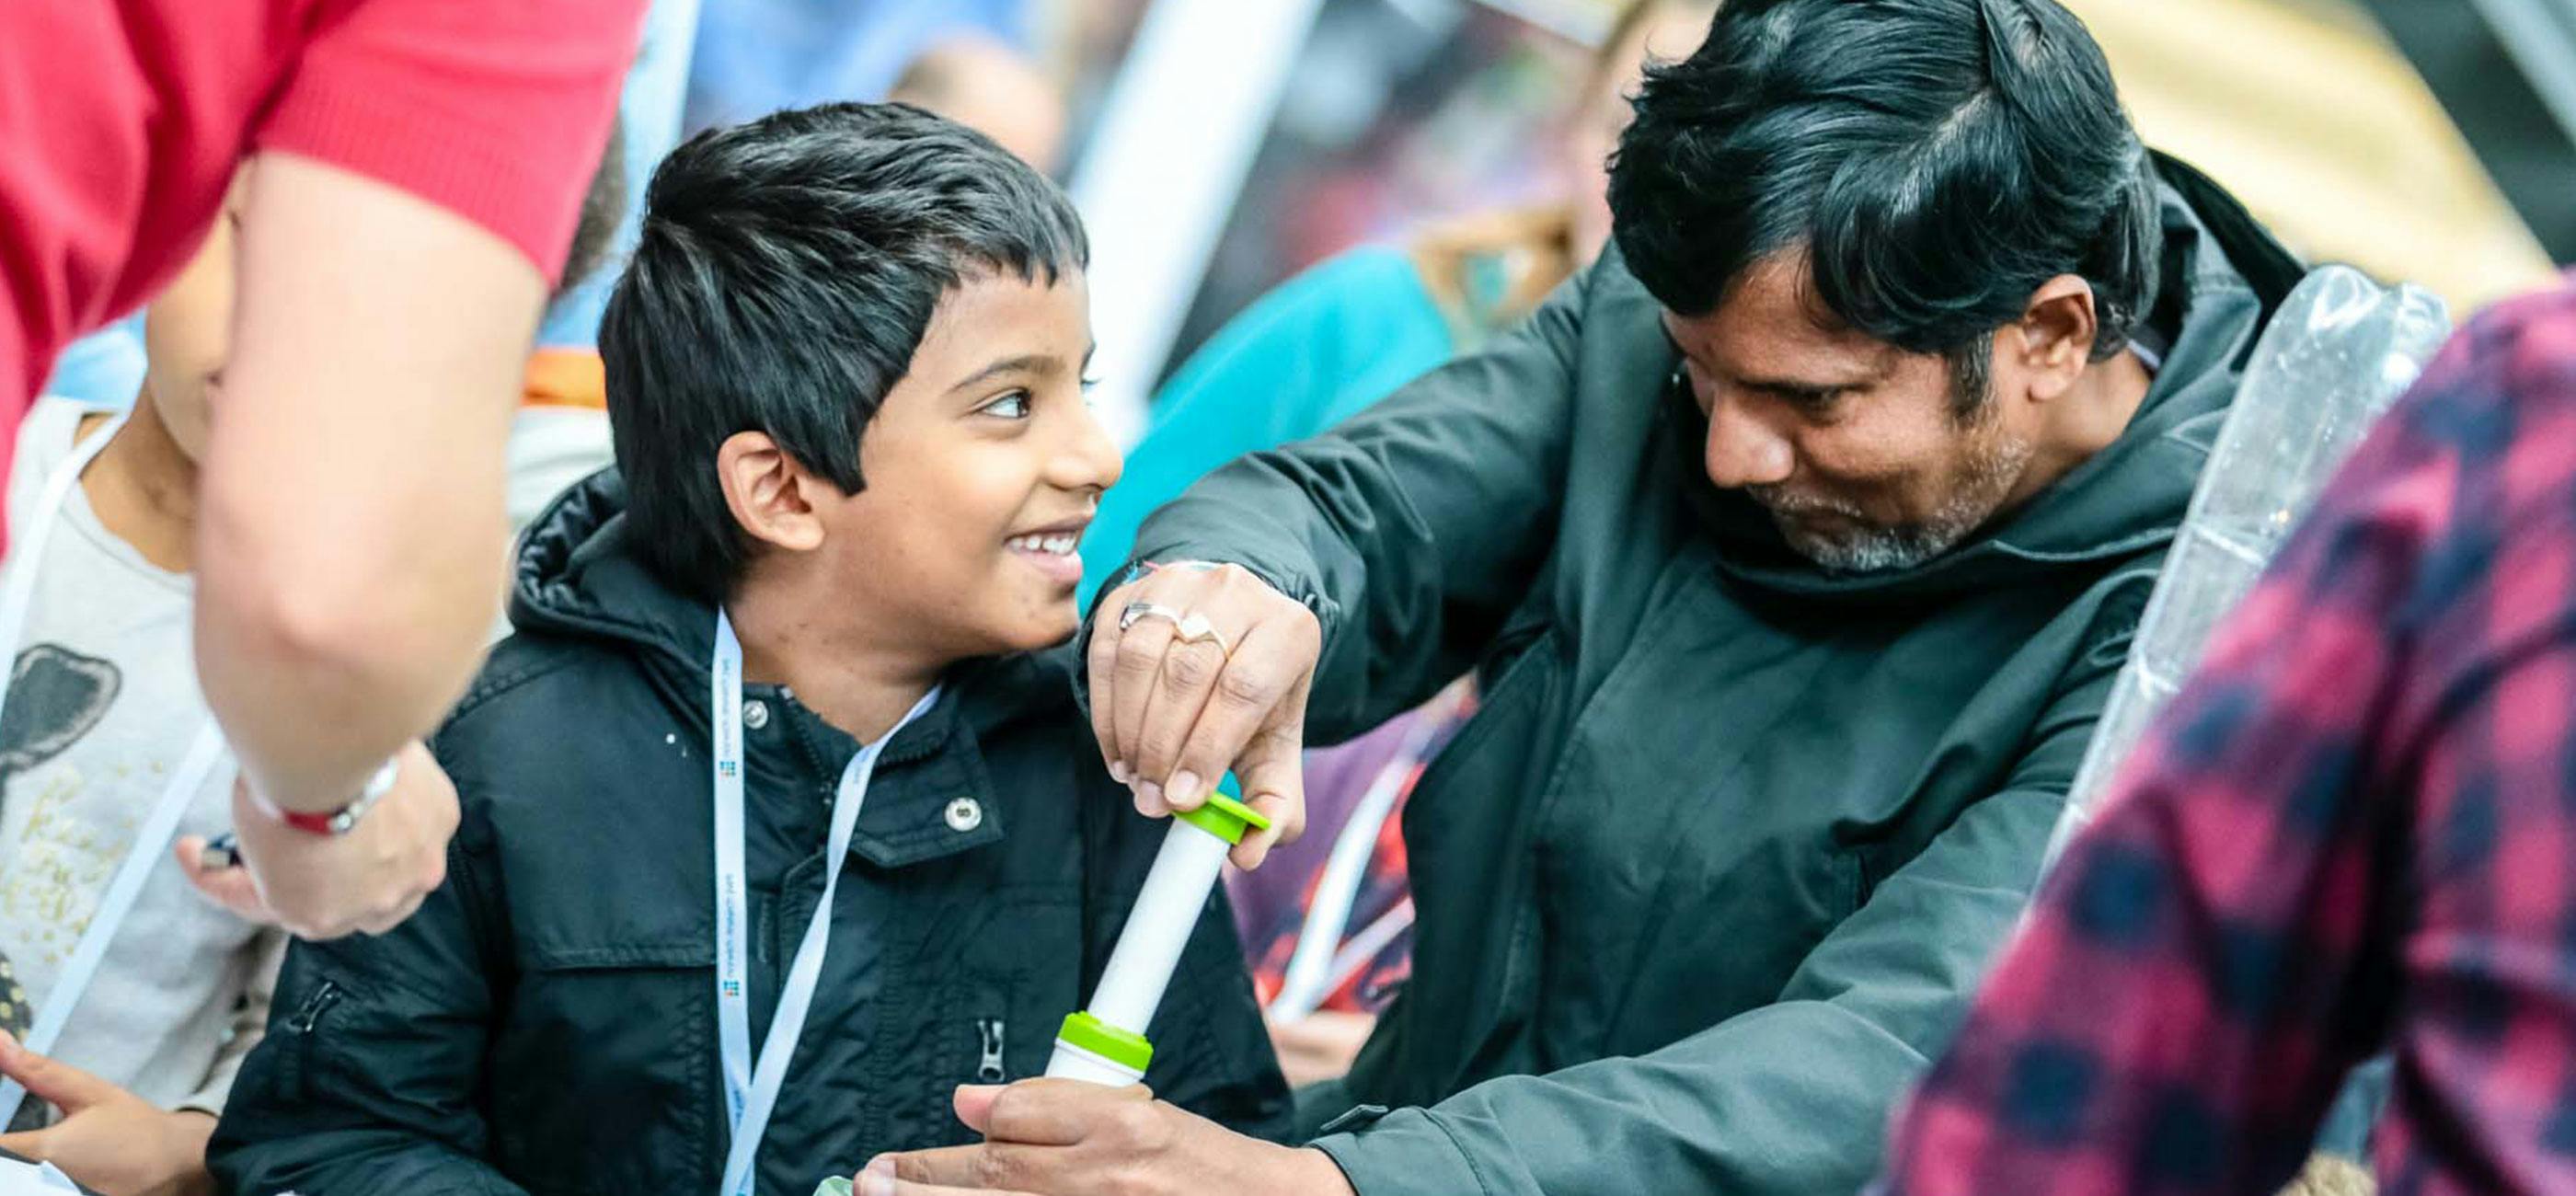 Boy and man at Norwich Science Festival 2019 - credit Mark Hewlett Photography